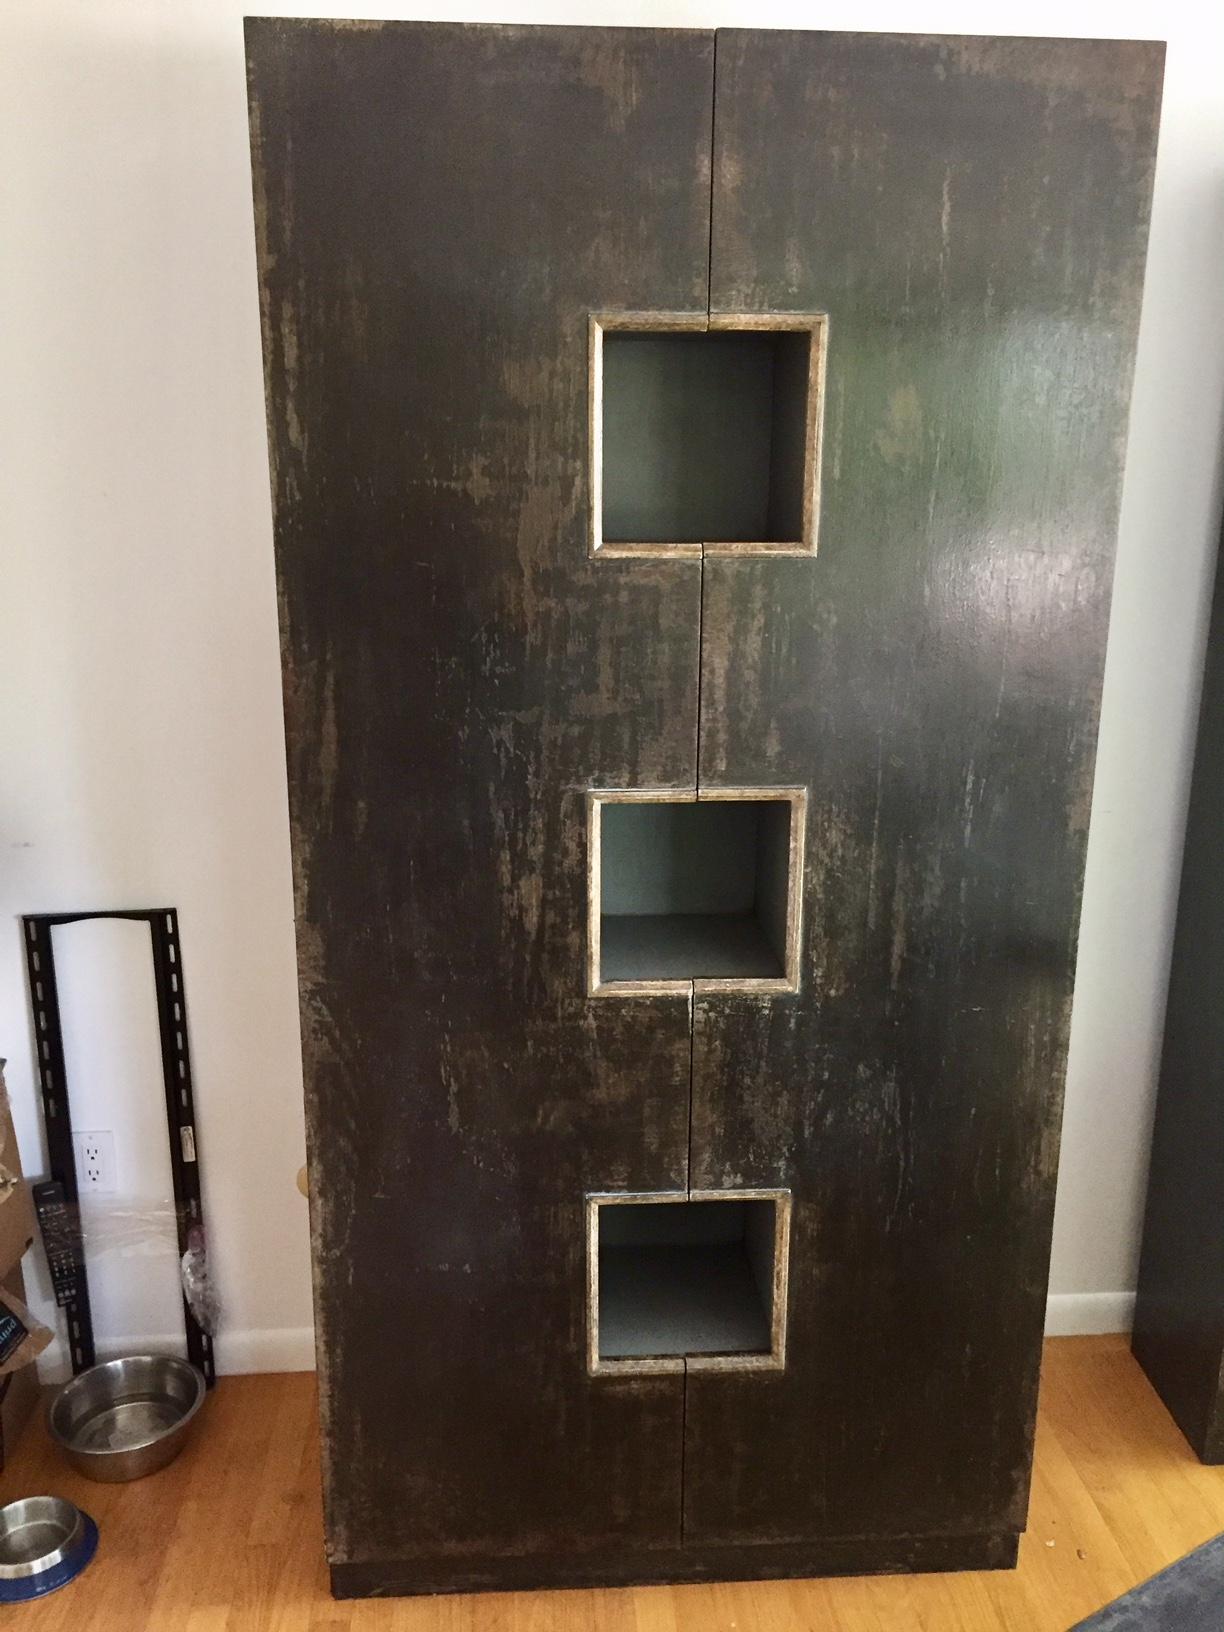 A handsome cabinet with distressed dark brownish grey finish and beautiful inset square blocks outlined in bronze to display objets d' arte. Two doors open to reveal grey painted interior with a fascinating complex of shelves.

